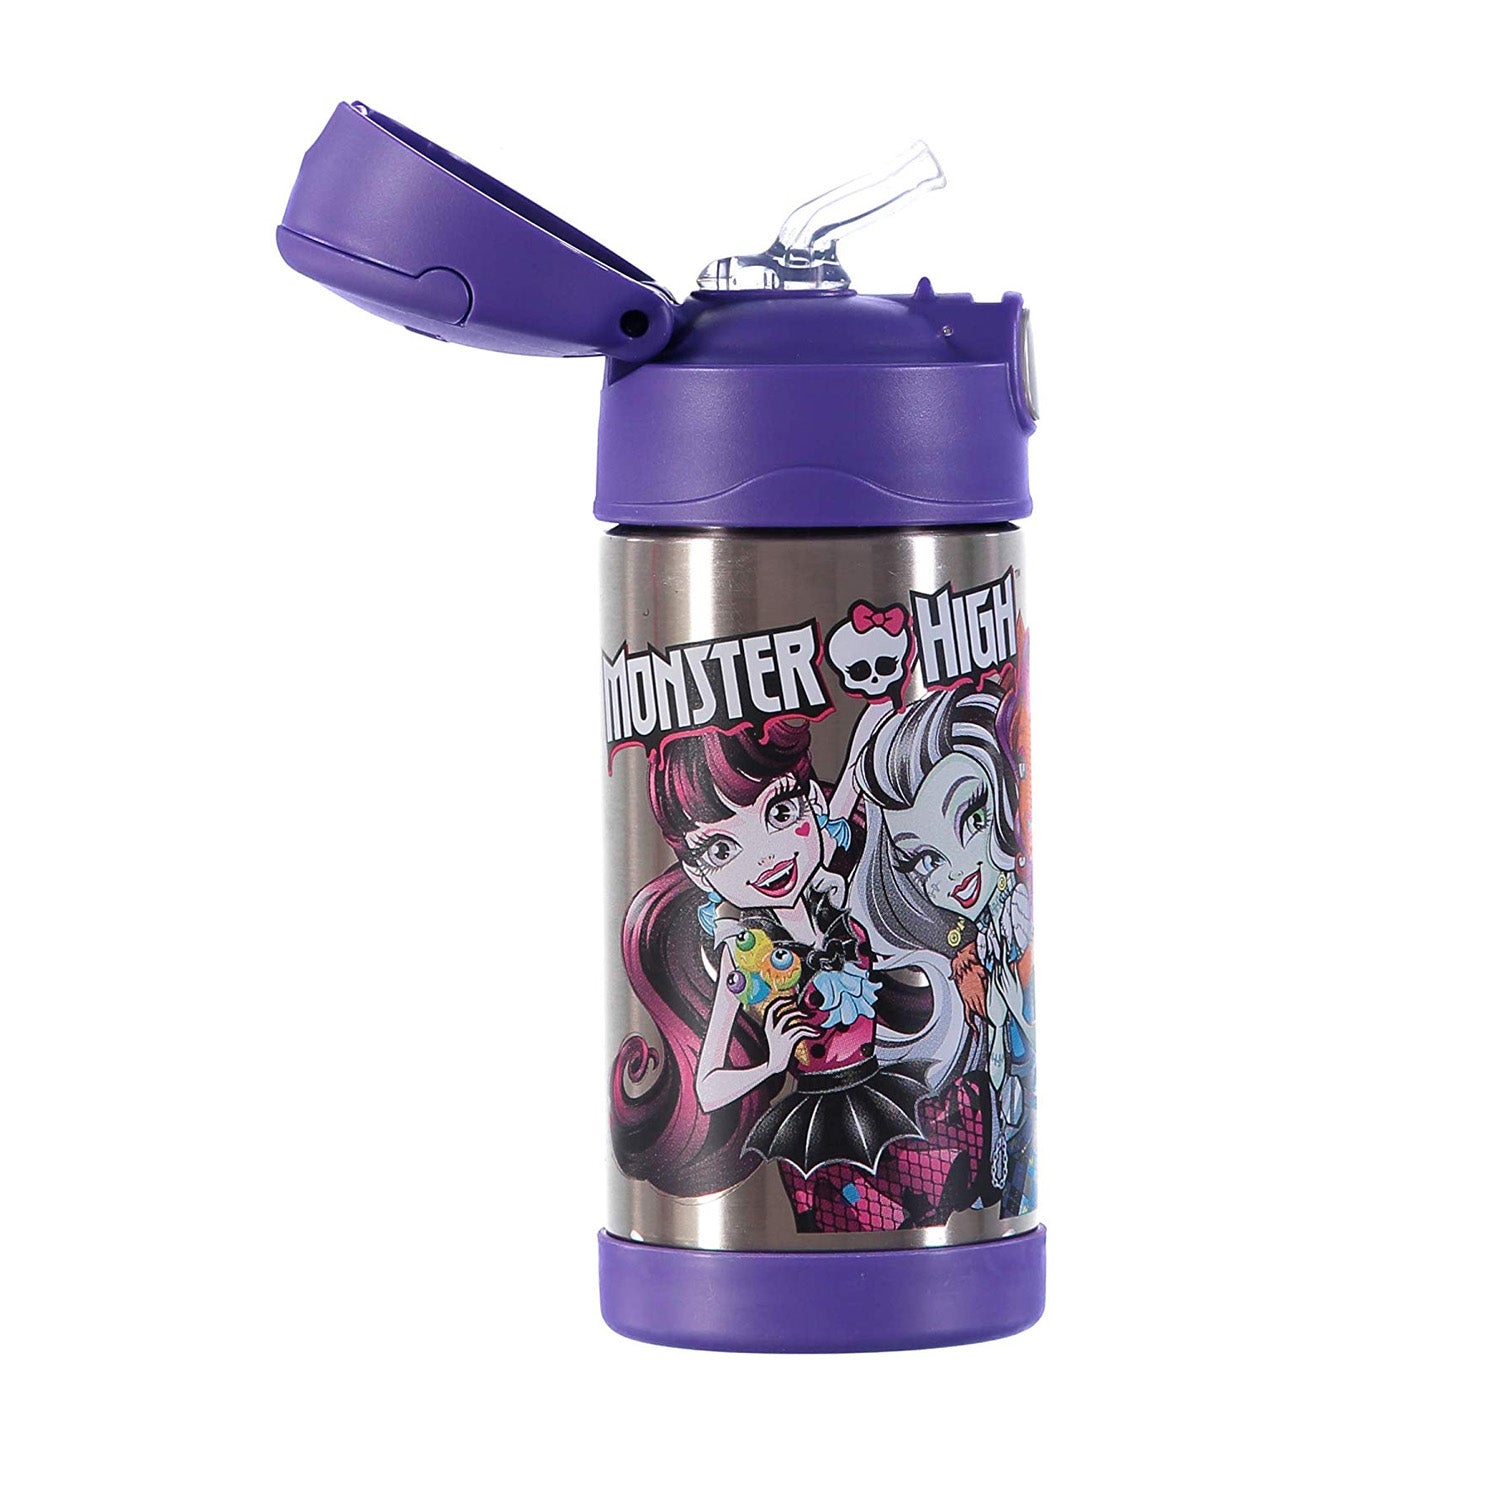 Thermos Funtainer 12 oz Straw Bottle Minnie Mouse